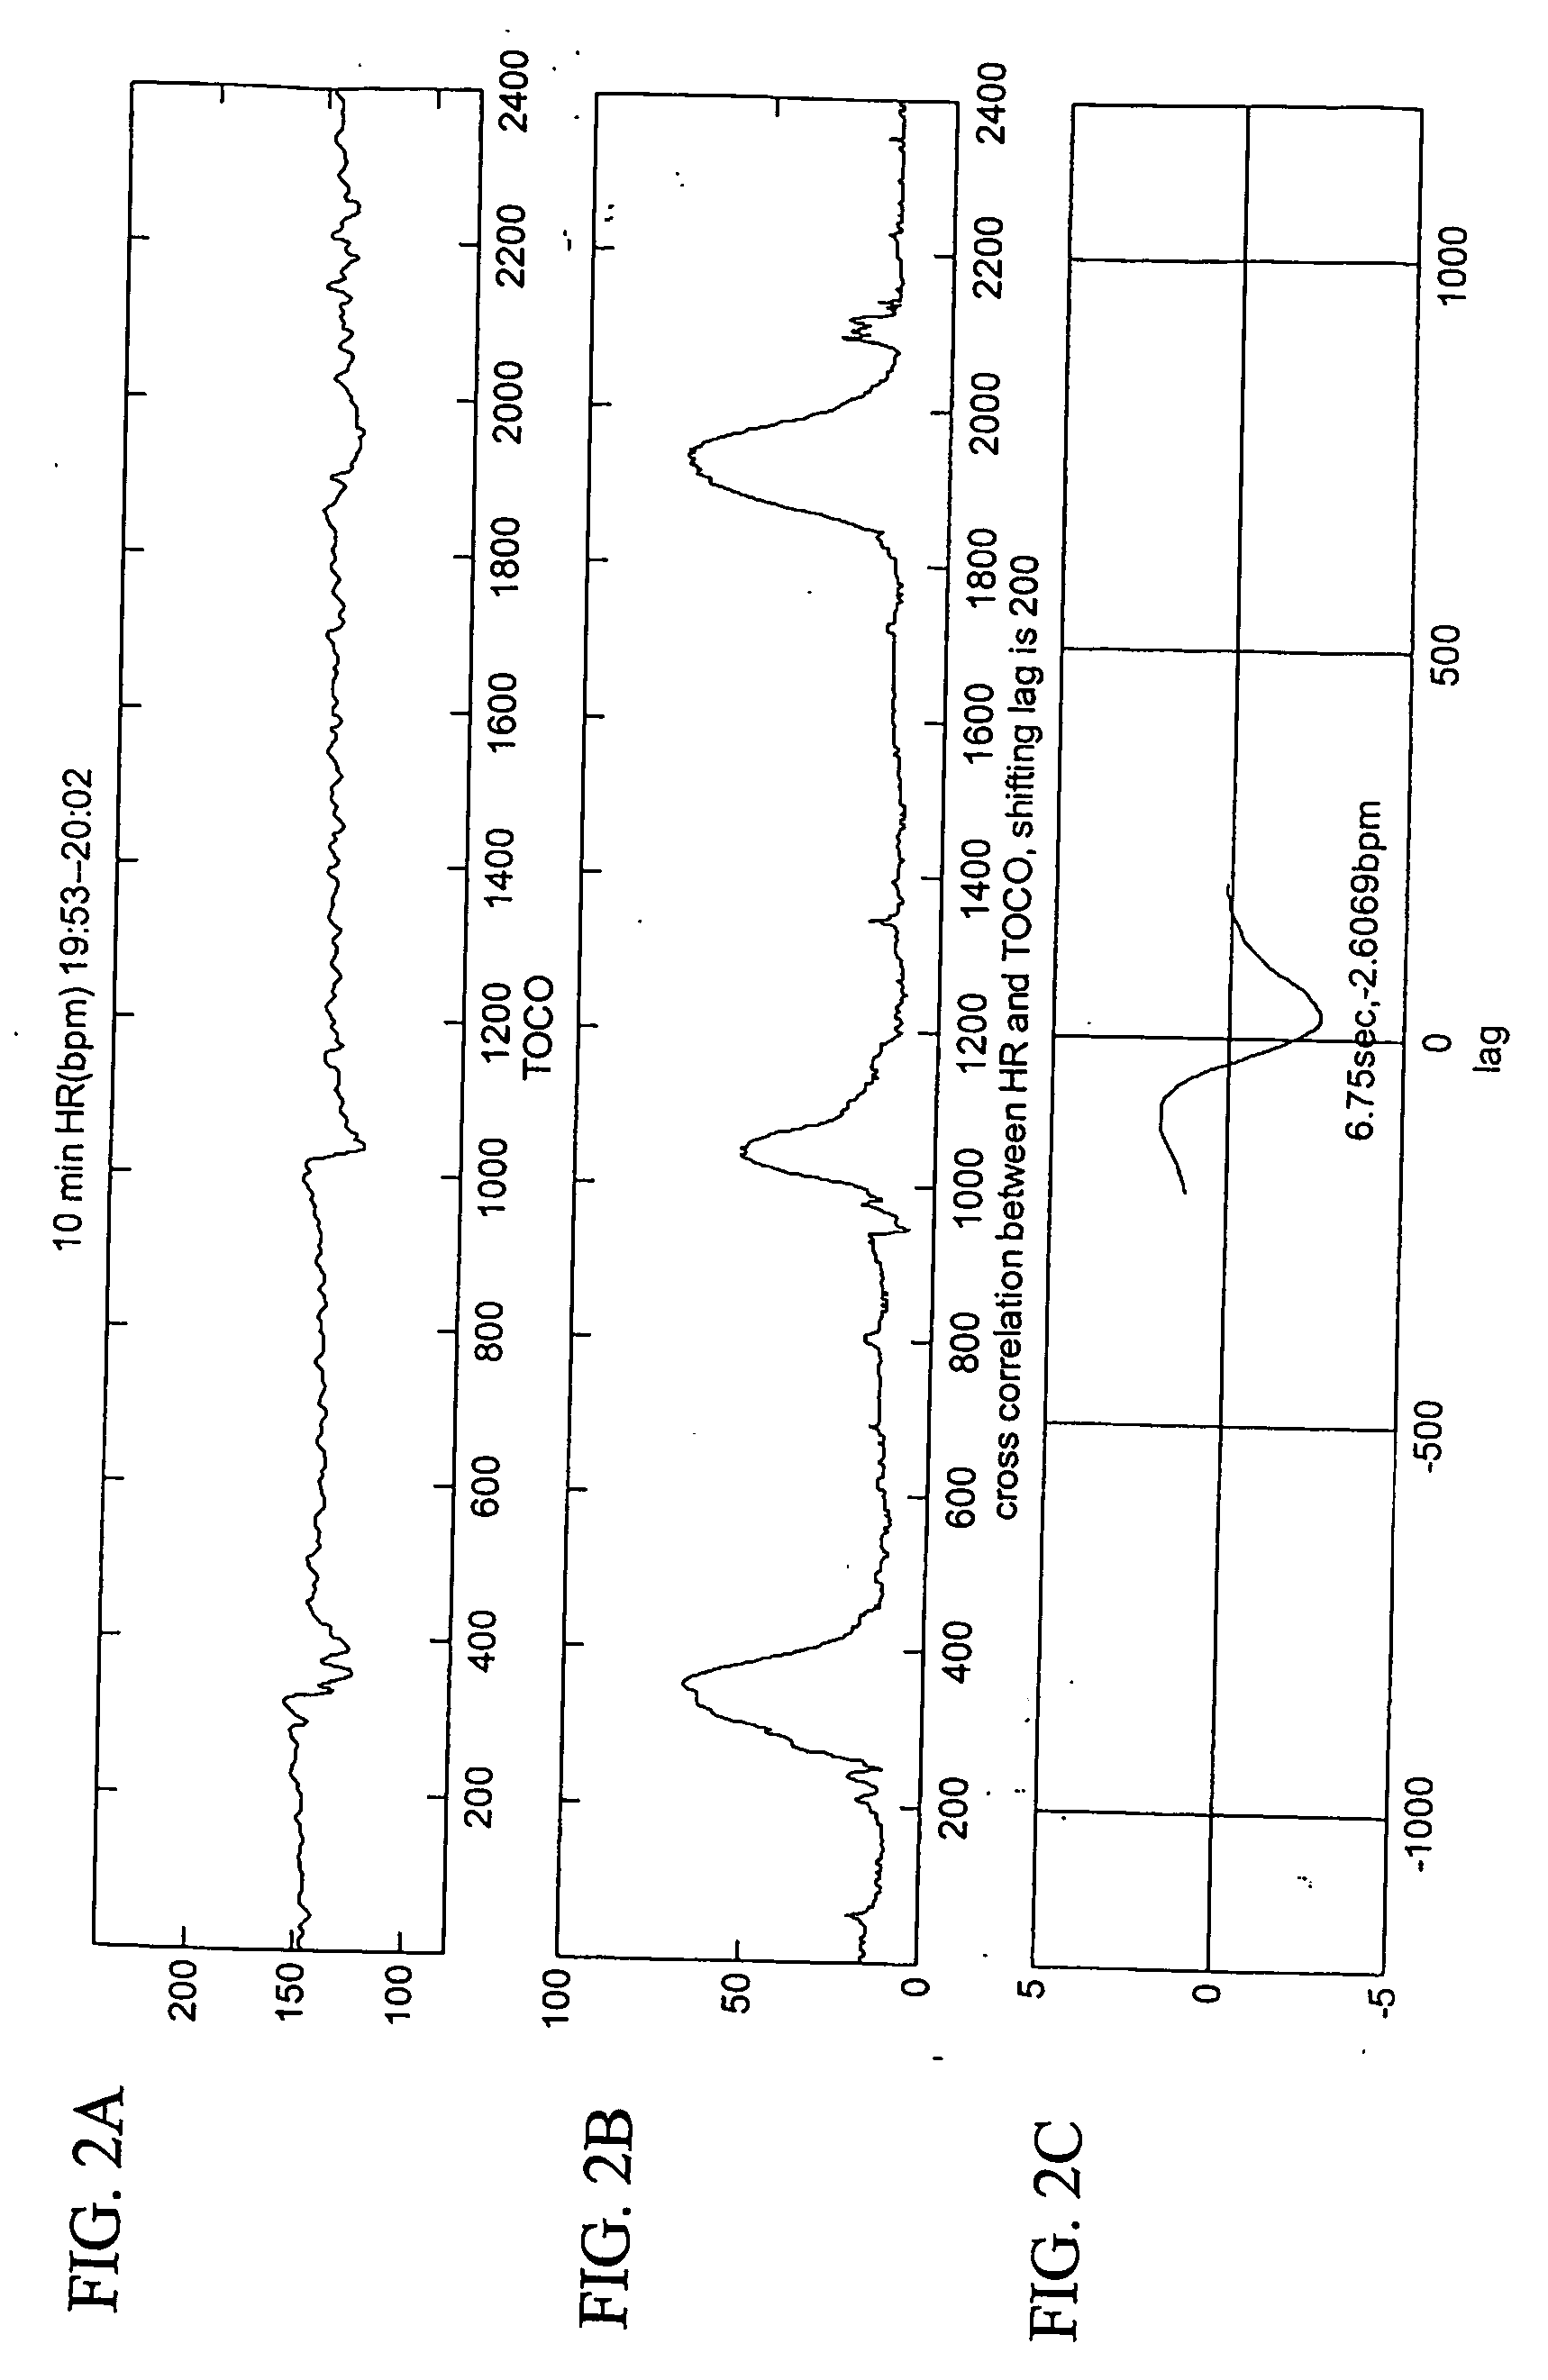 Quantitative fetal heart rate and cardiotocographic monitoring system and related method thereof